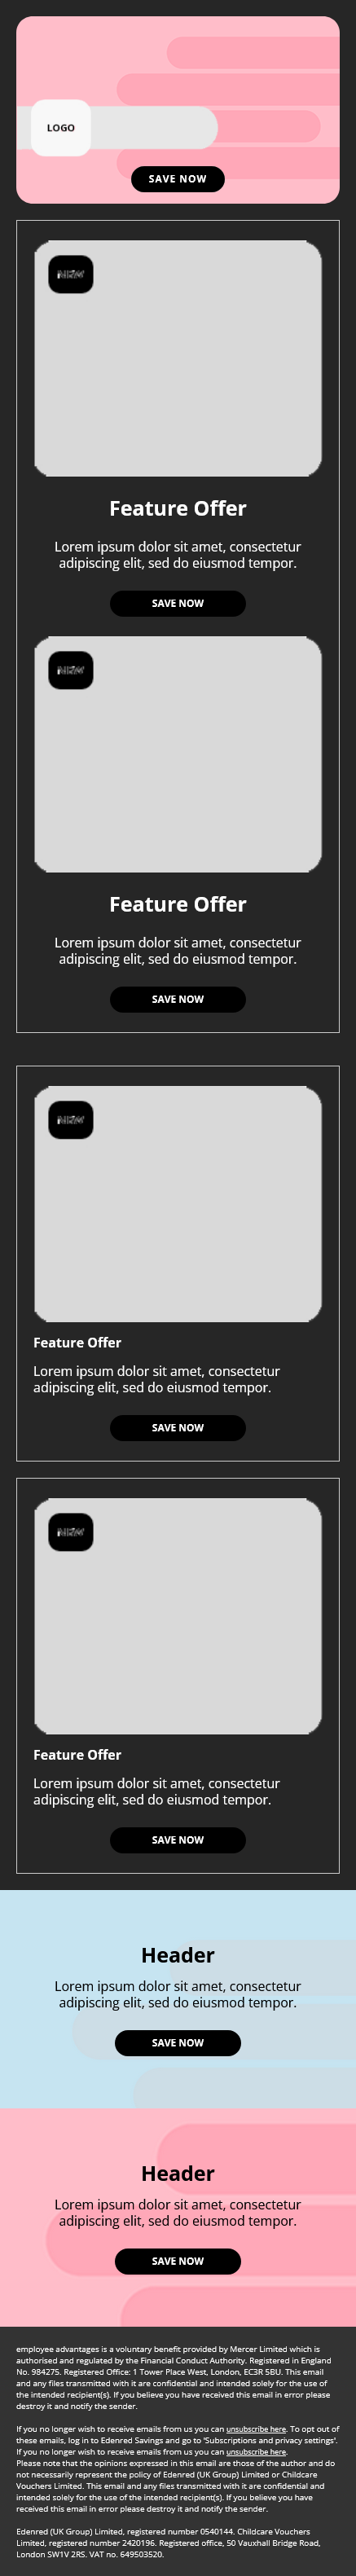 Email Templates Created For Edenred Marketing Digital Payments Dark mode on mobile design